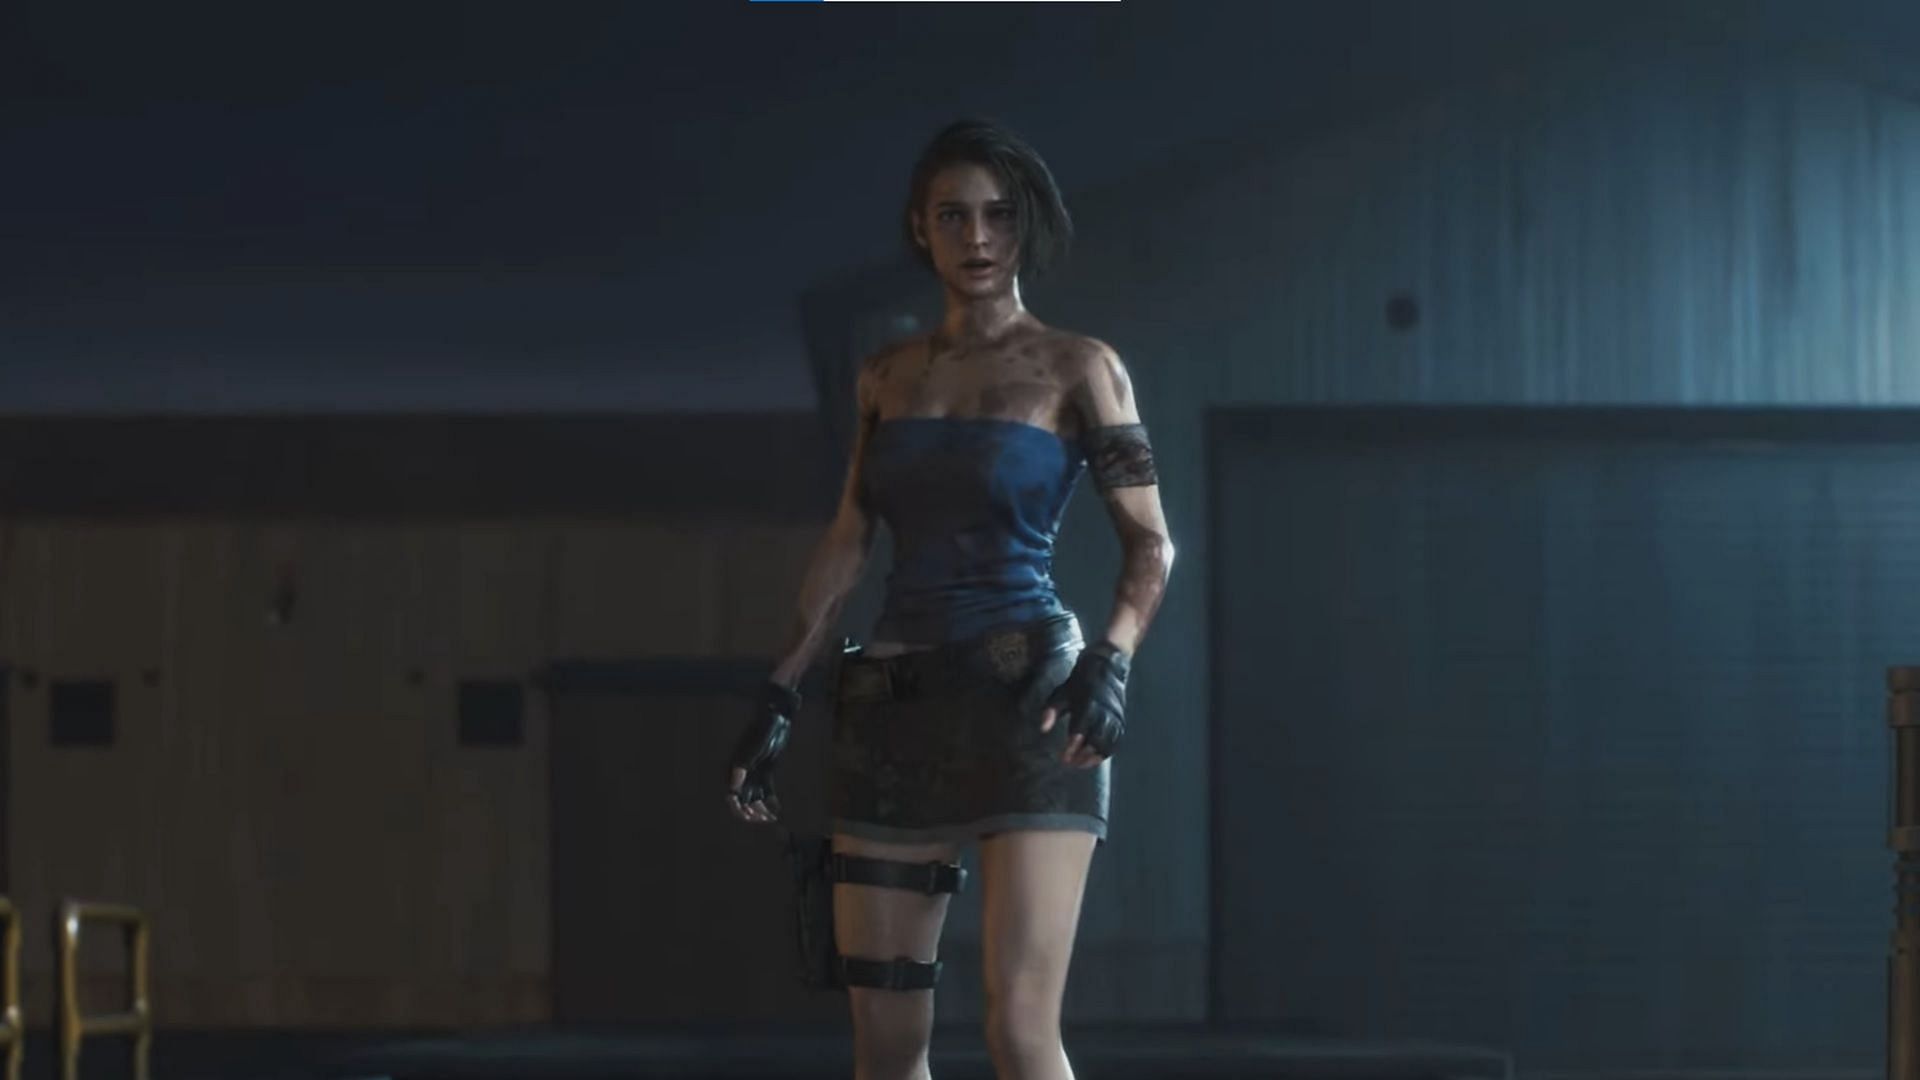 A long-time Resident Evil player has discovered a new version of Jill Valentine